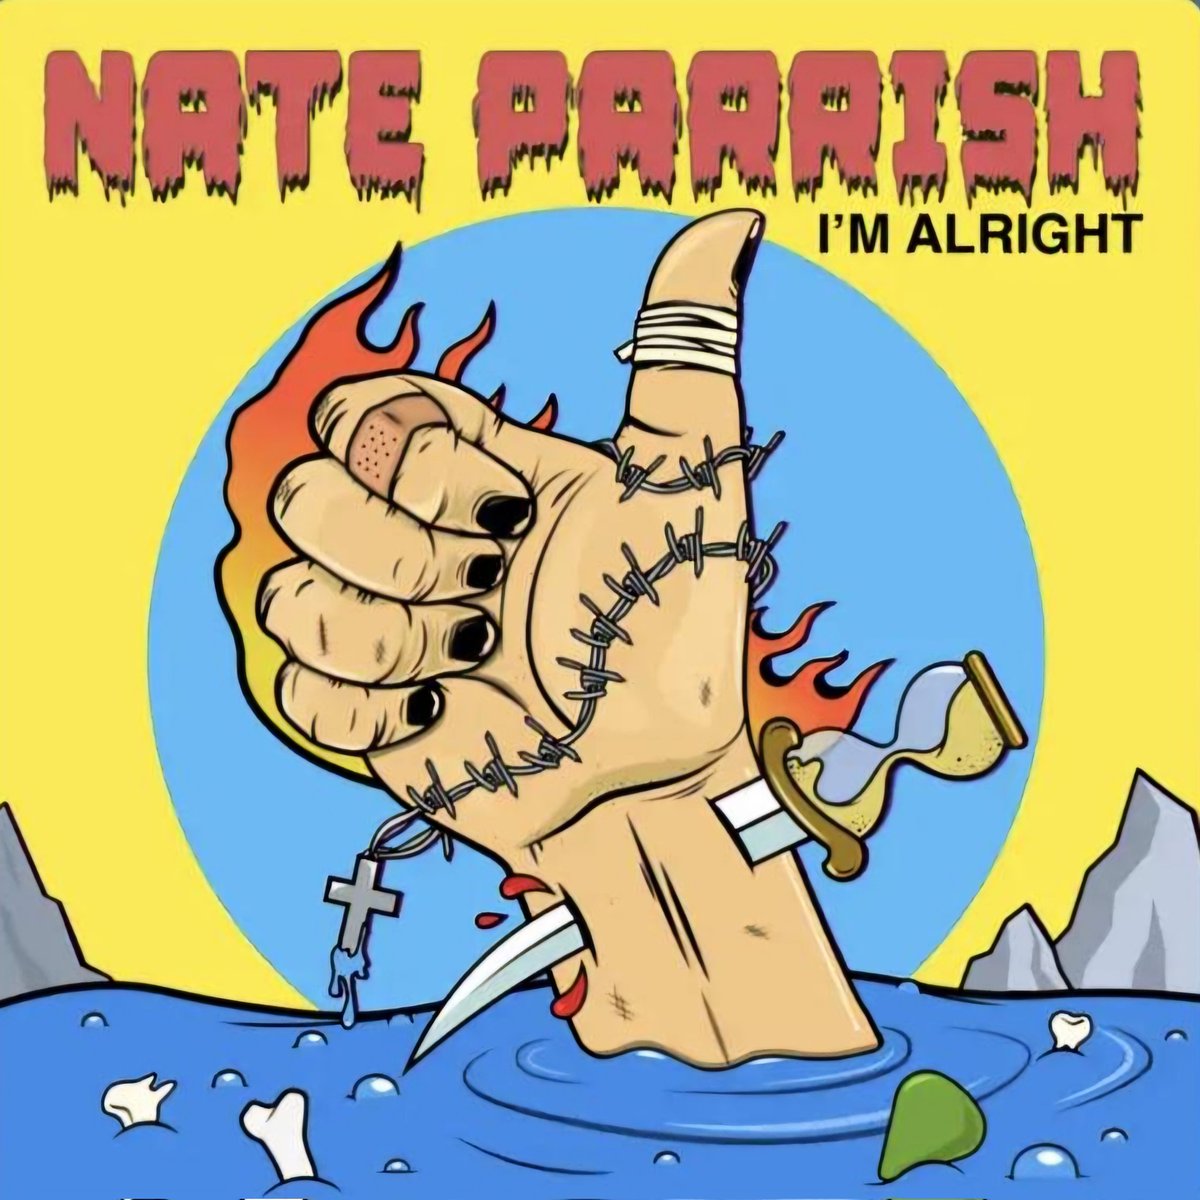 New song from @NateParrish4! #music #newmusic #nowplaying #newmusic2024 #rock #metal #follow #song #listentothis #instamusic #band #artist #promote #instagood #newtunes #tunes #trending #influencer #musicinfluencer #metalmusic #musicpromotion #nateparrish #imalright #alright